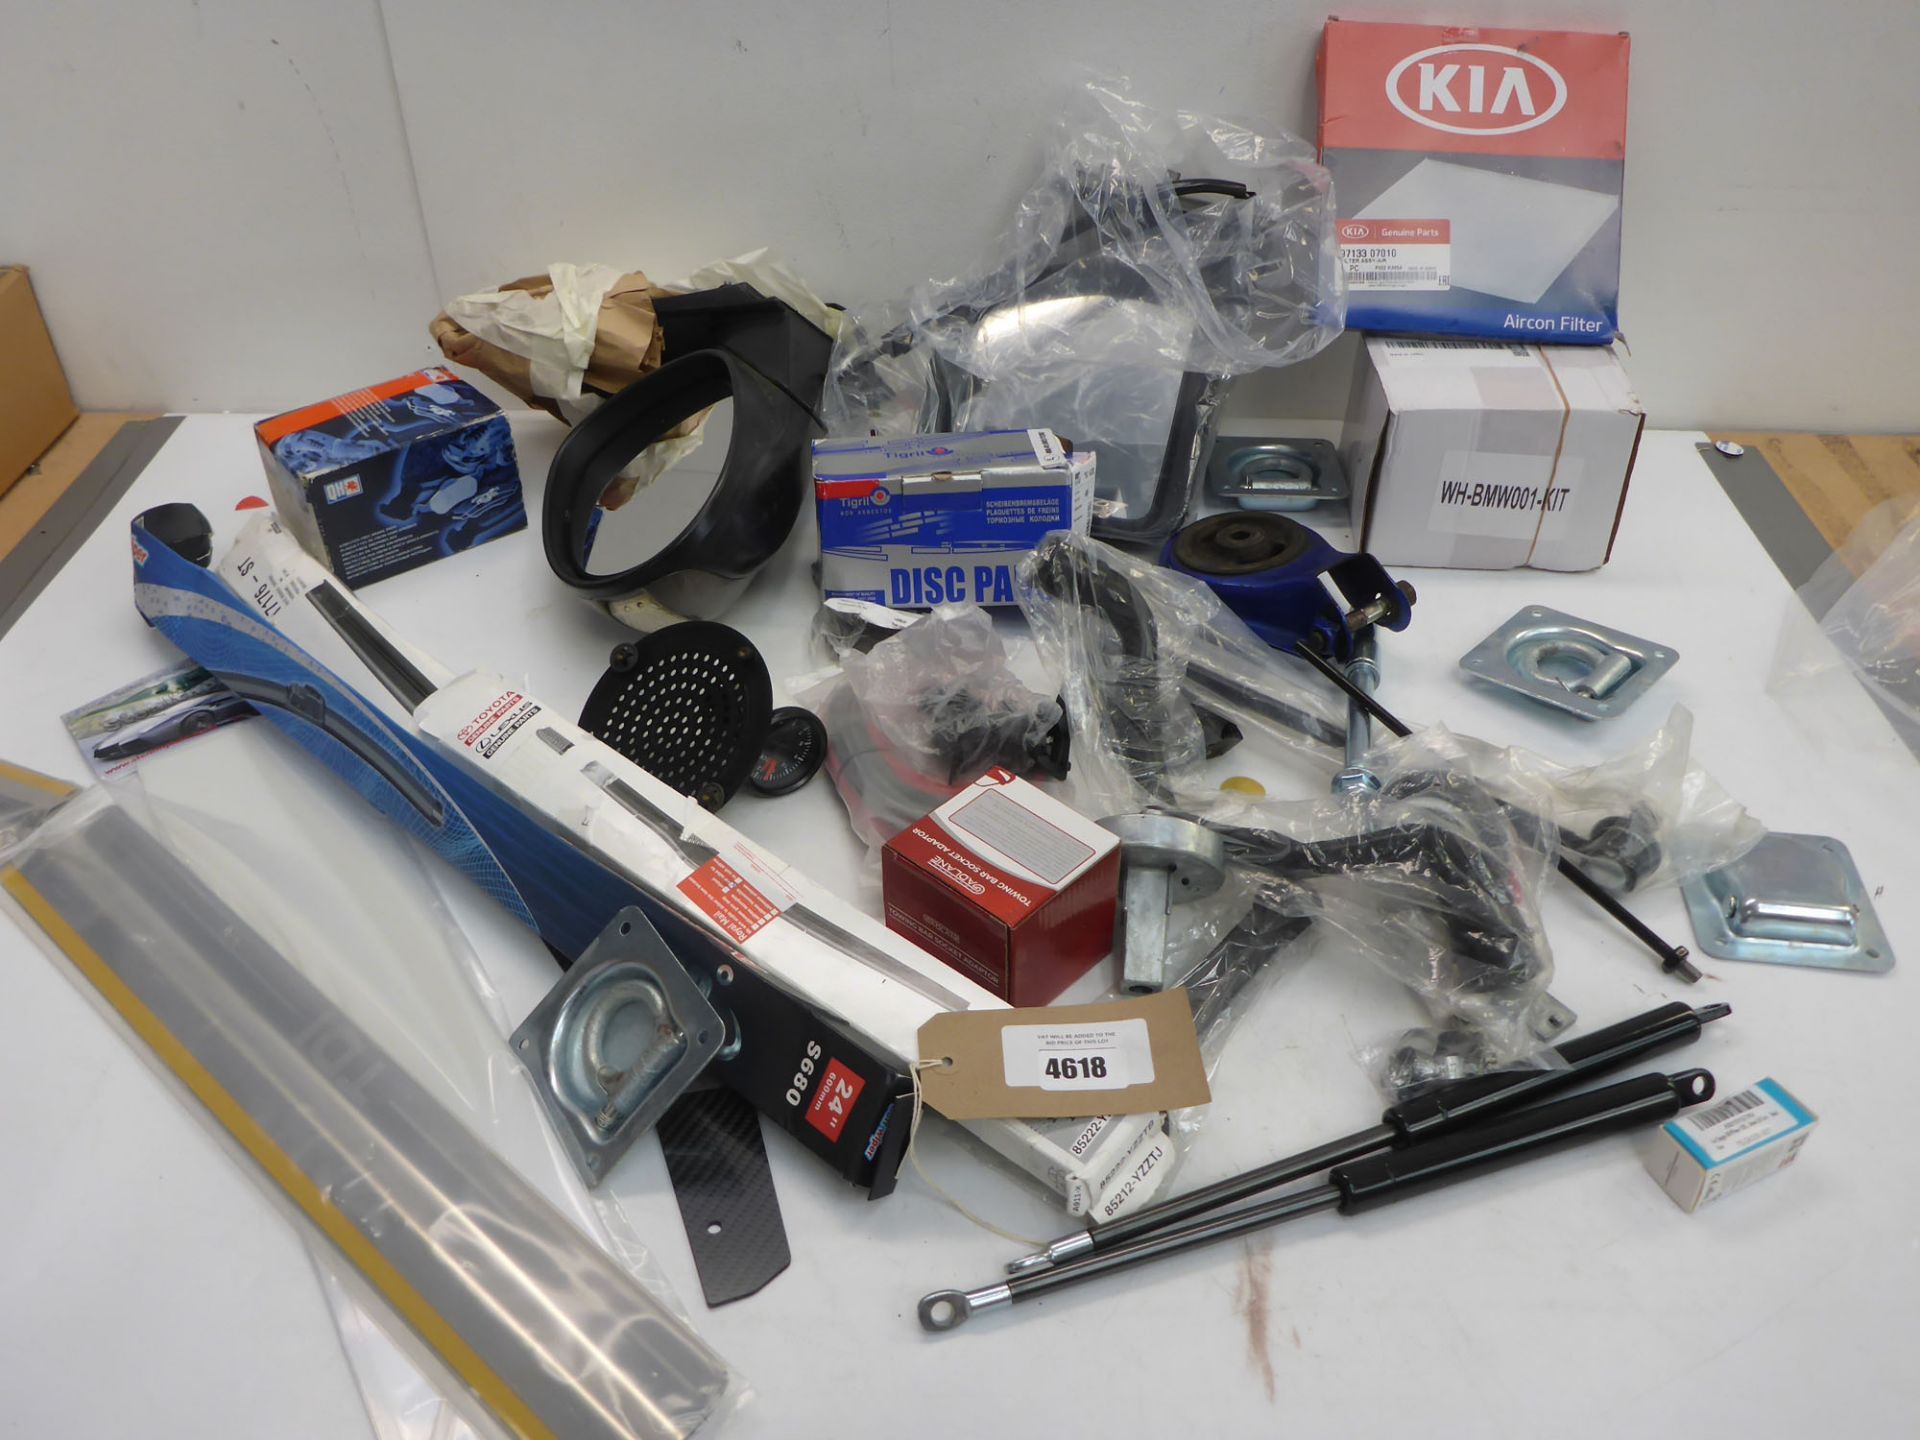 Car & bike accessories including brake pads, windscreen wipers, Aircon filter, wing mirrors etc